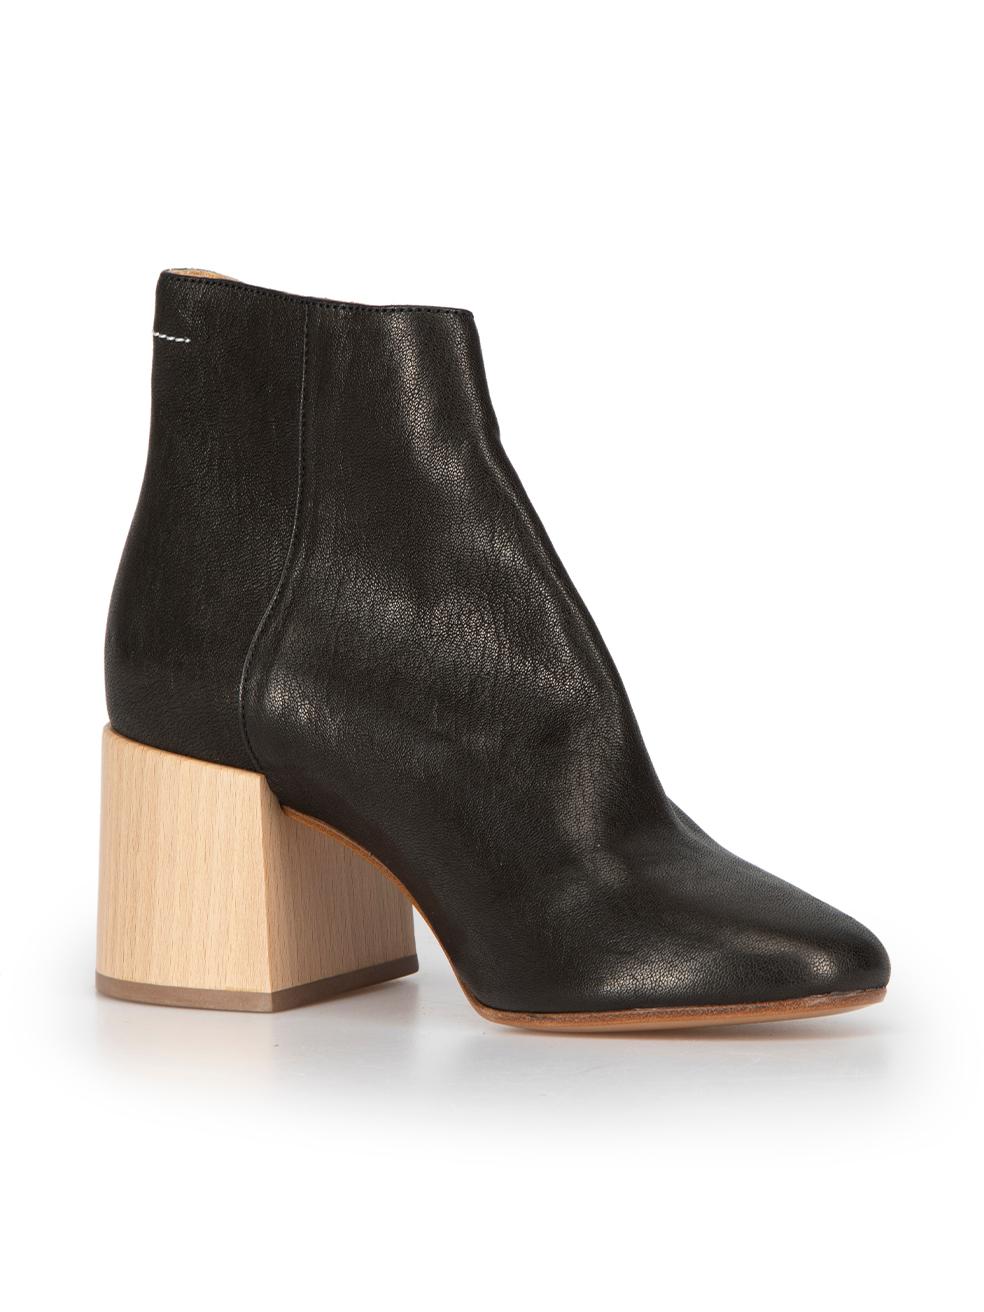 CONDITION is Very good. Hardly any visible wear to boots is evident on this used MM6 Maison Margiela designer resale item. This item comes with original dust bag.



Details


Black

Leather

Ankle boots

Cut out accent

Round toe

Mid wooden block